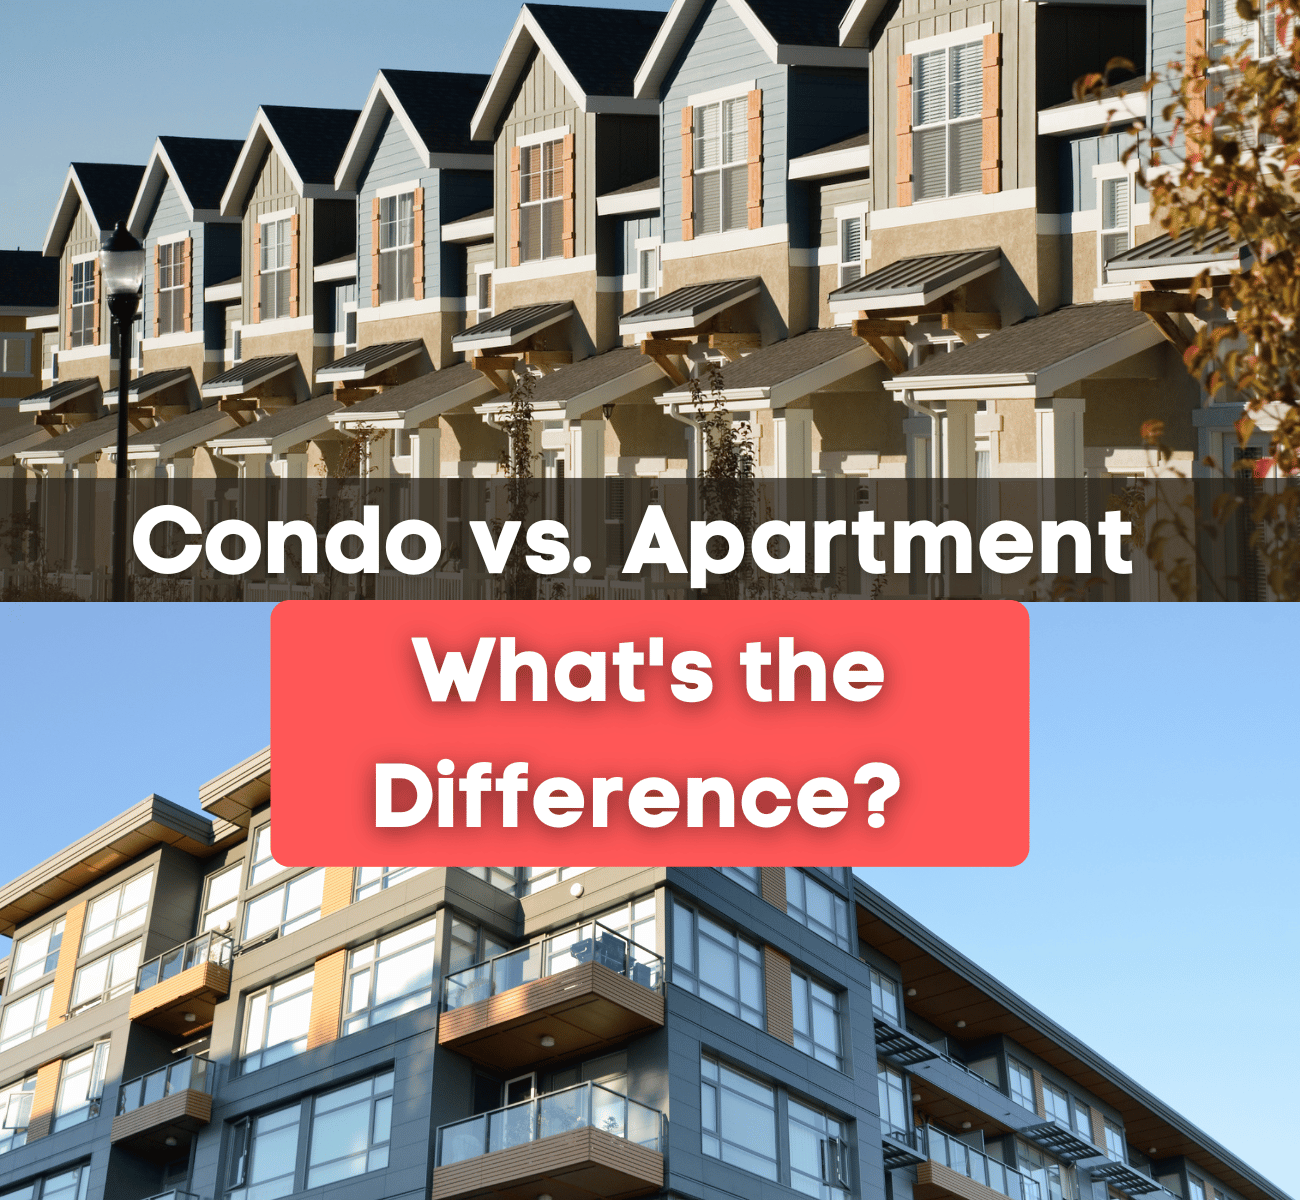 Condo vs. Apartment: What's the Difference?